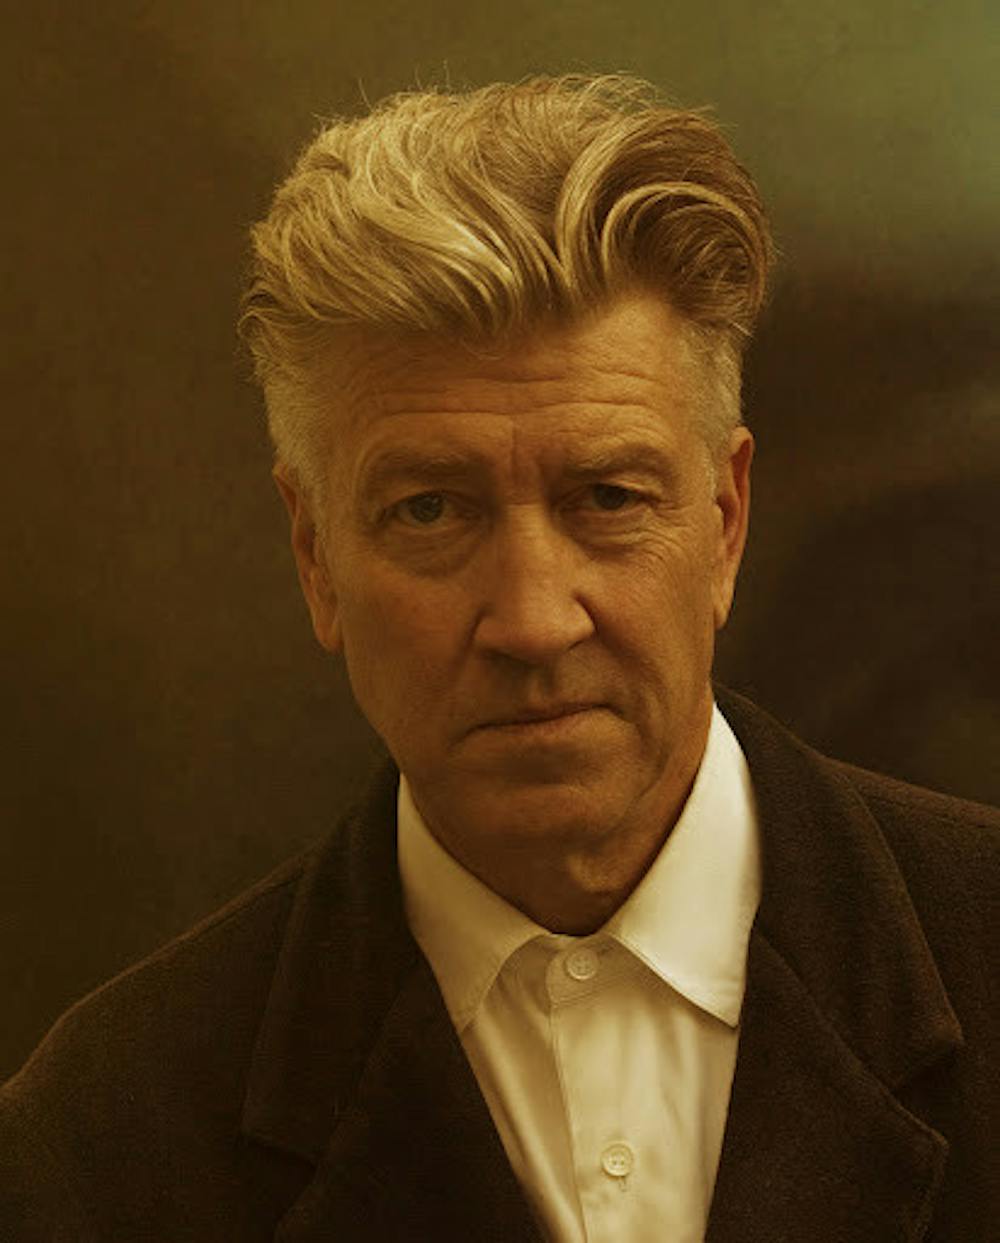 <p><em>David Lynch’s work has been known to garner cult followings that have expanded across multiple generations and into the younger generation today (Photo courtesy of </em><a href="https://www.imdb.com/name/nm0000186/" target=""><em>IMDb</em></a><em>).</em></p>